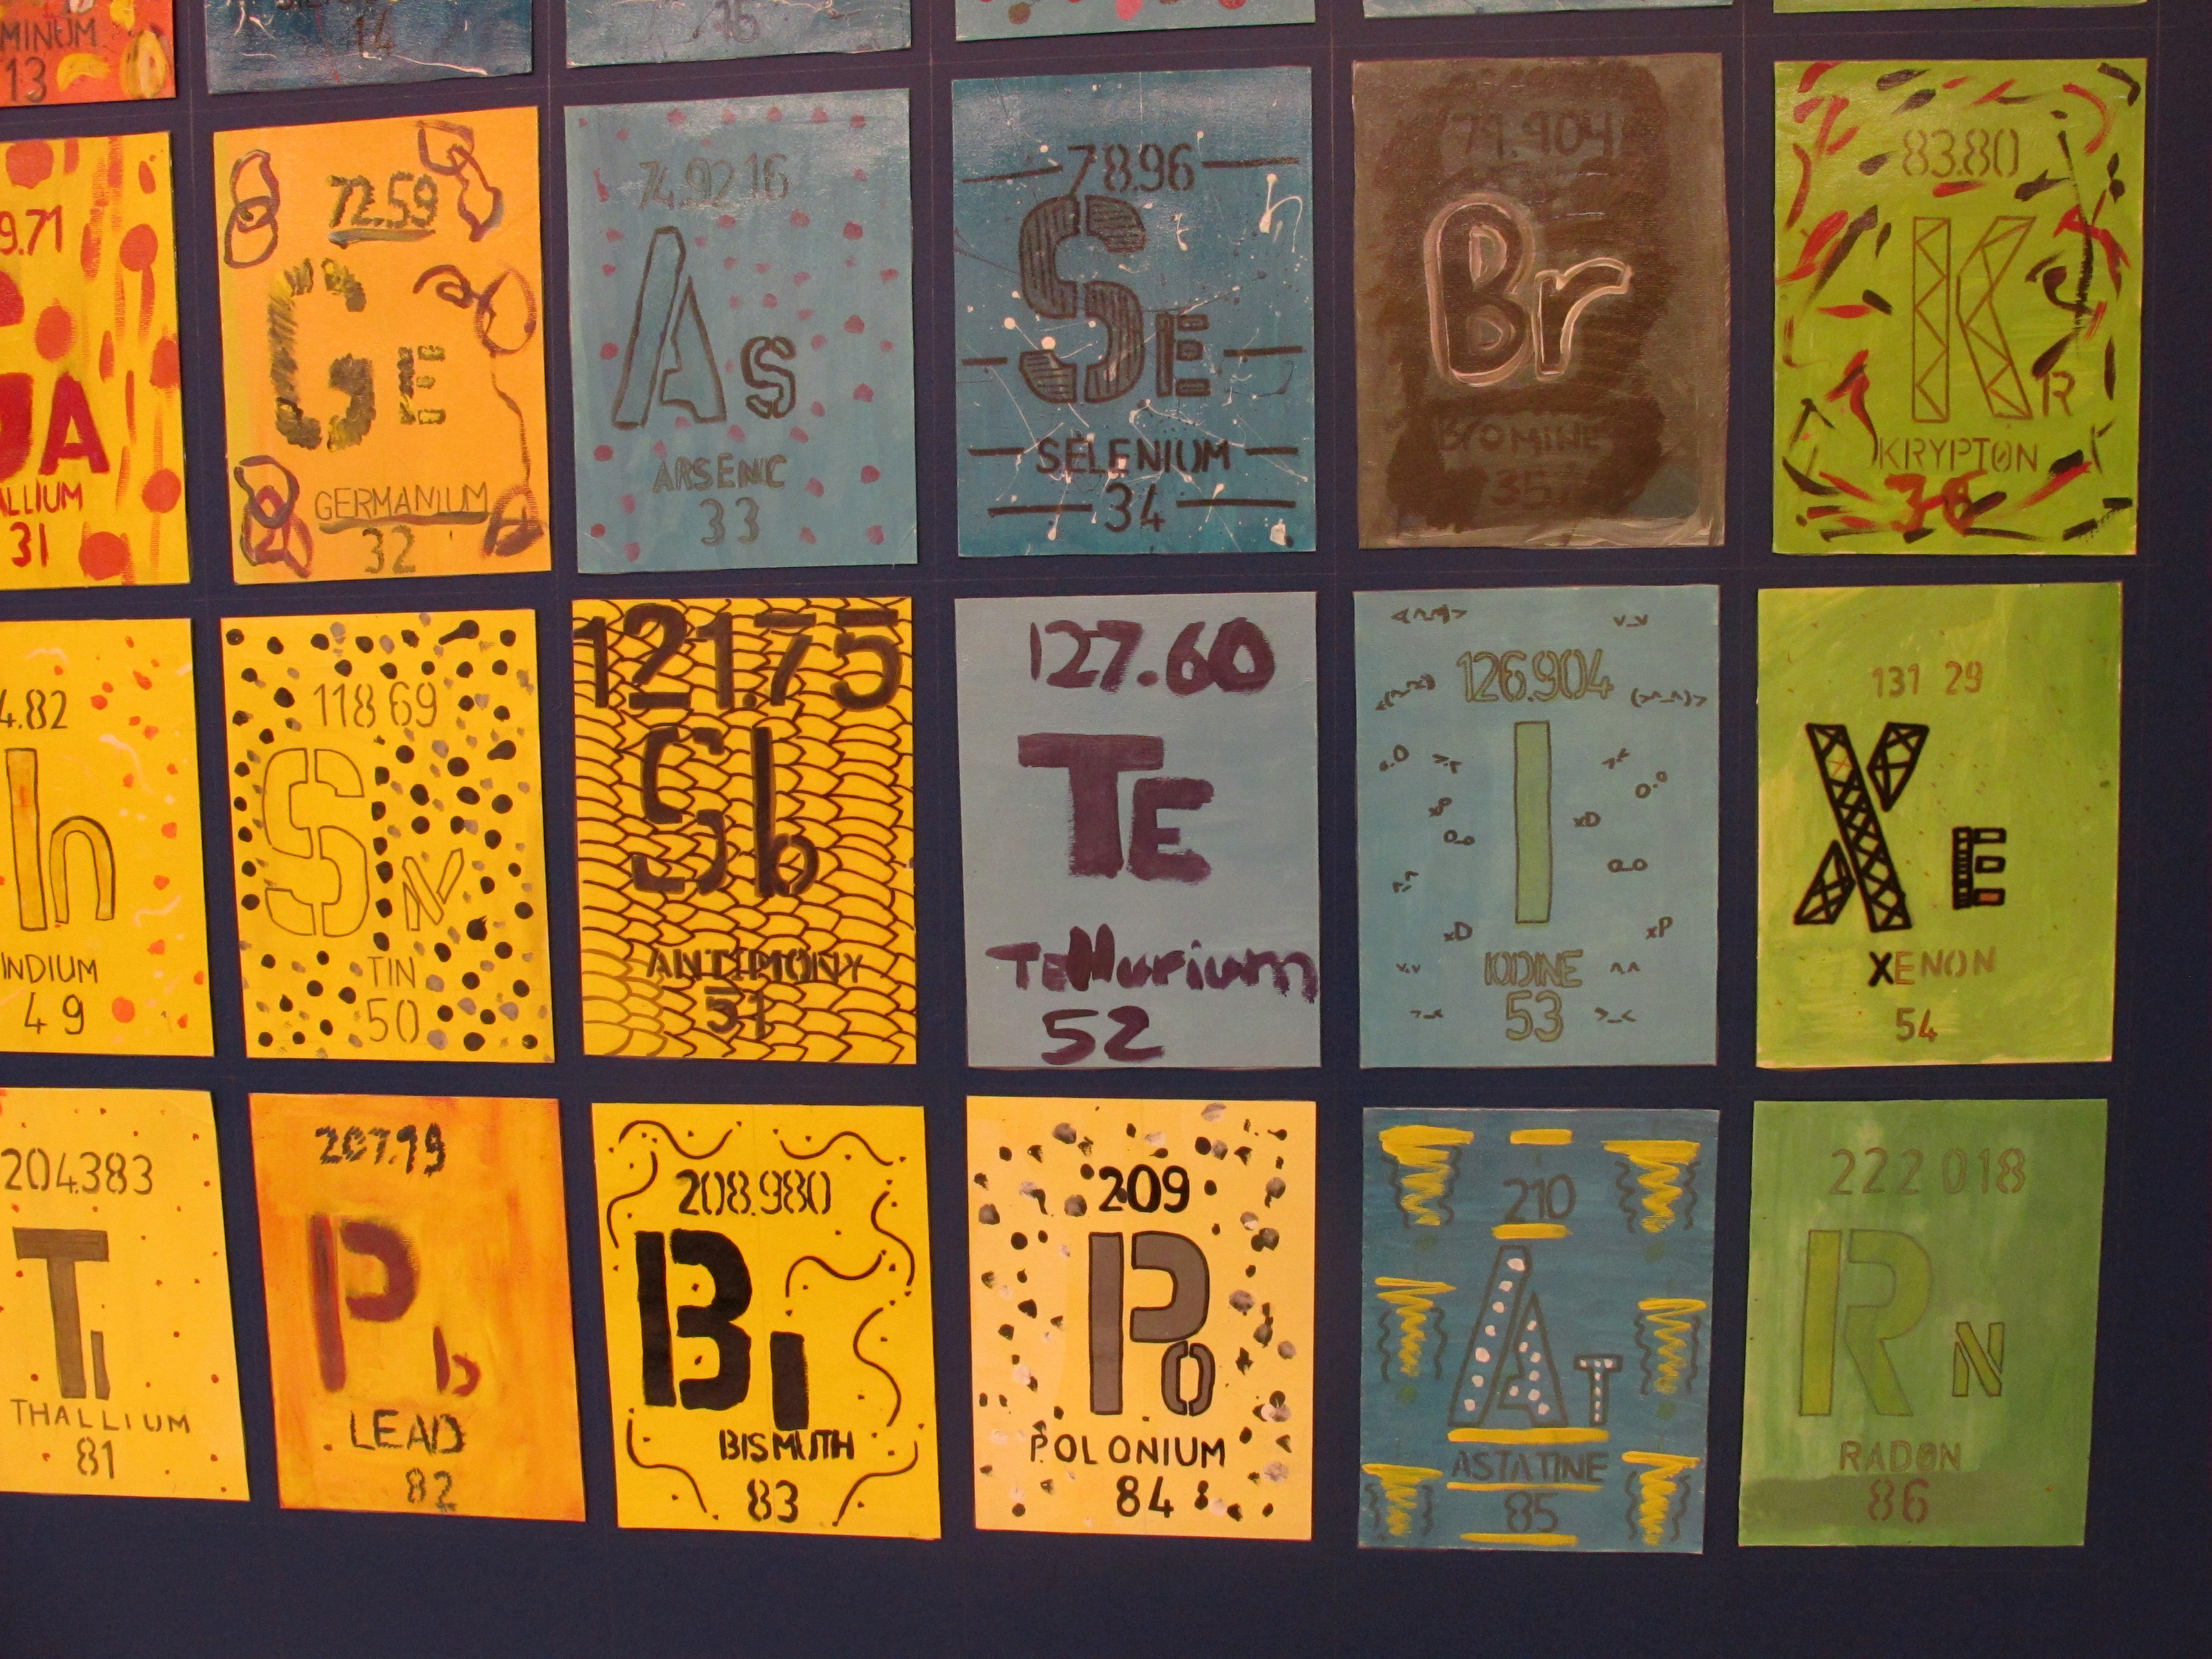 Periodic Table Project